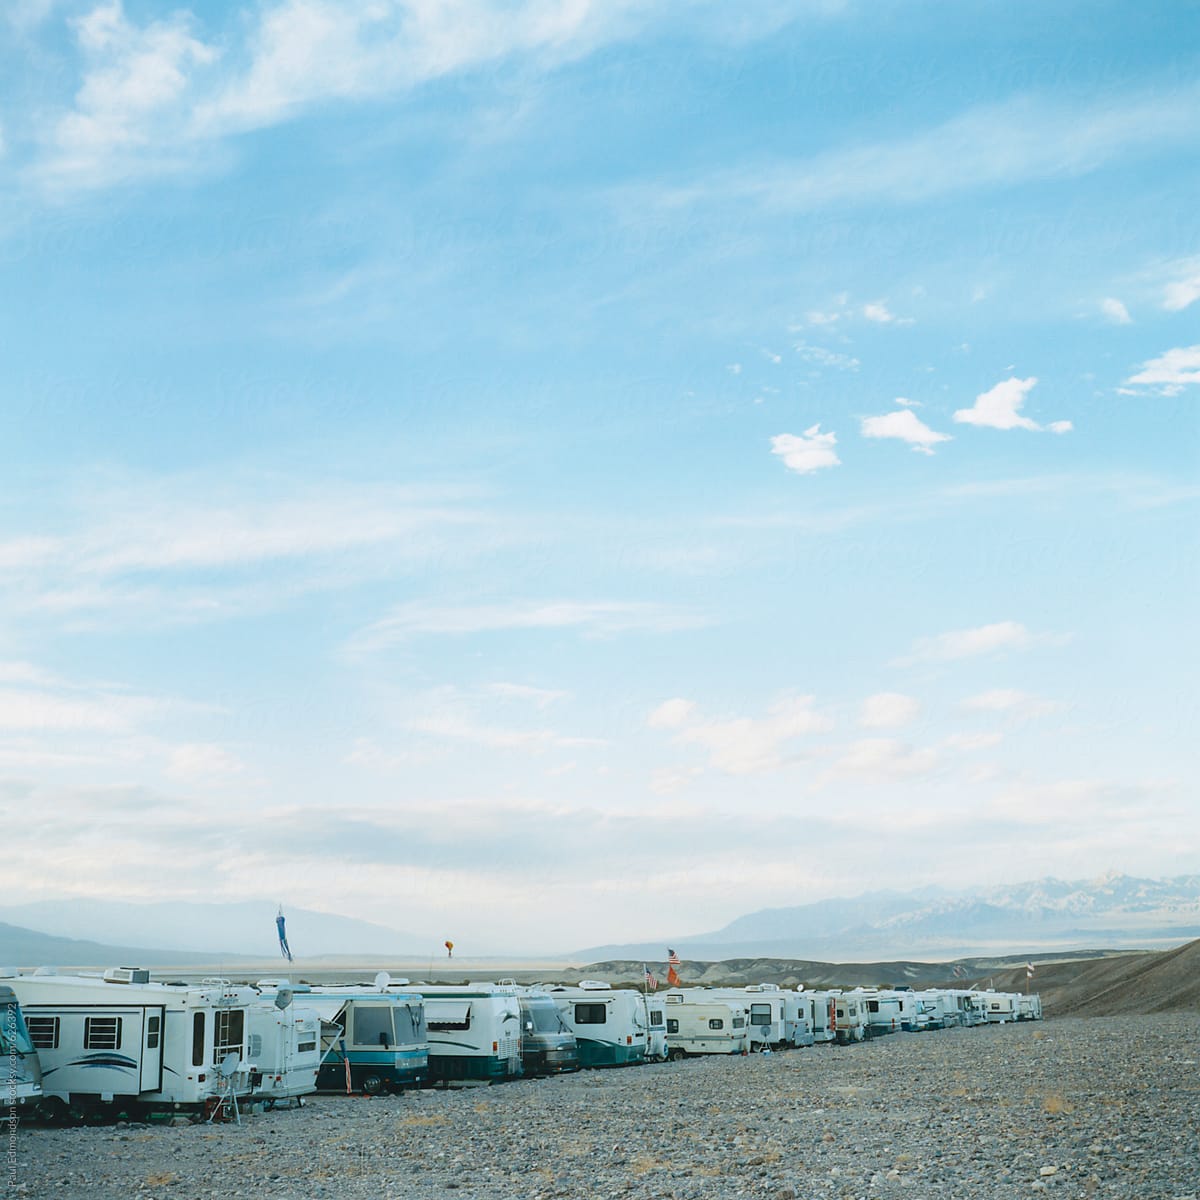 Rows of parked RV's in Death Valley NP, CA